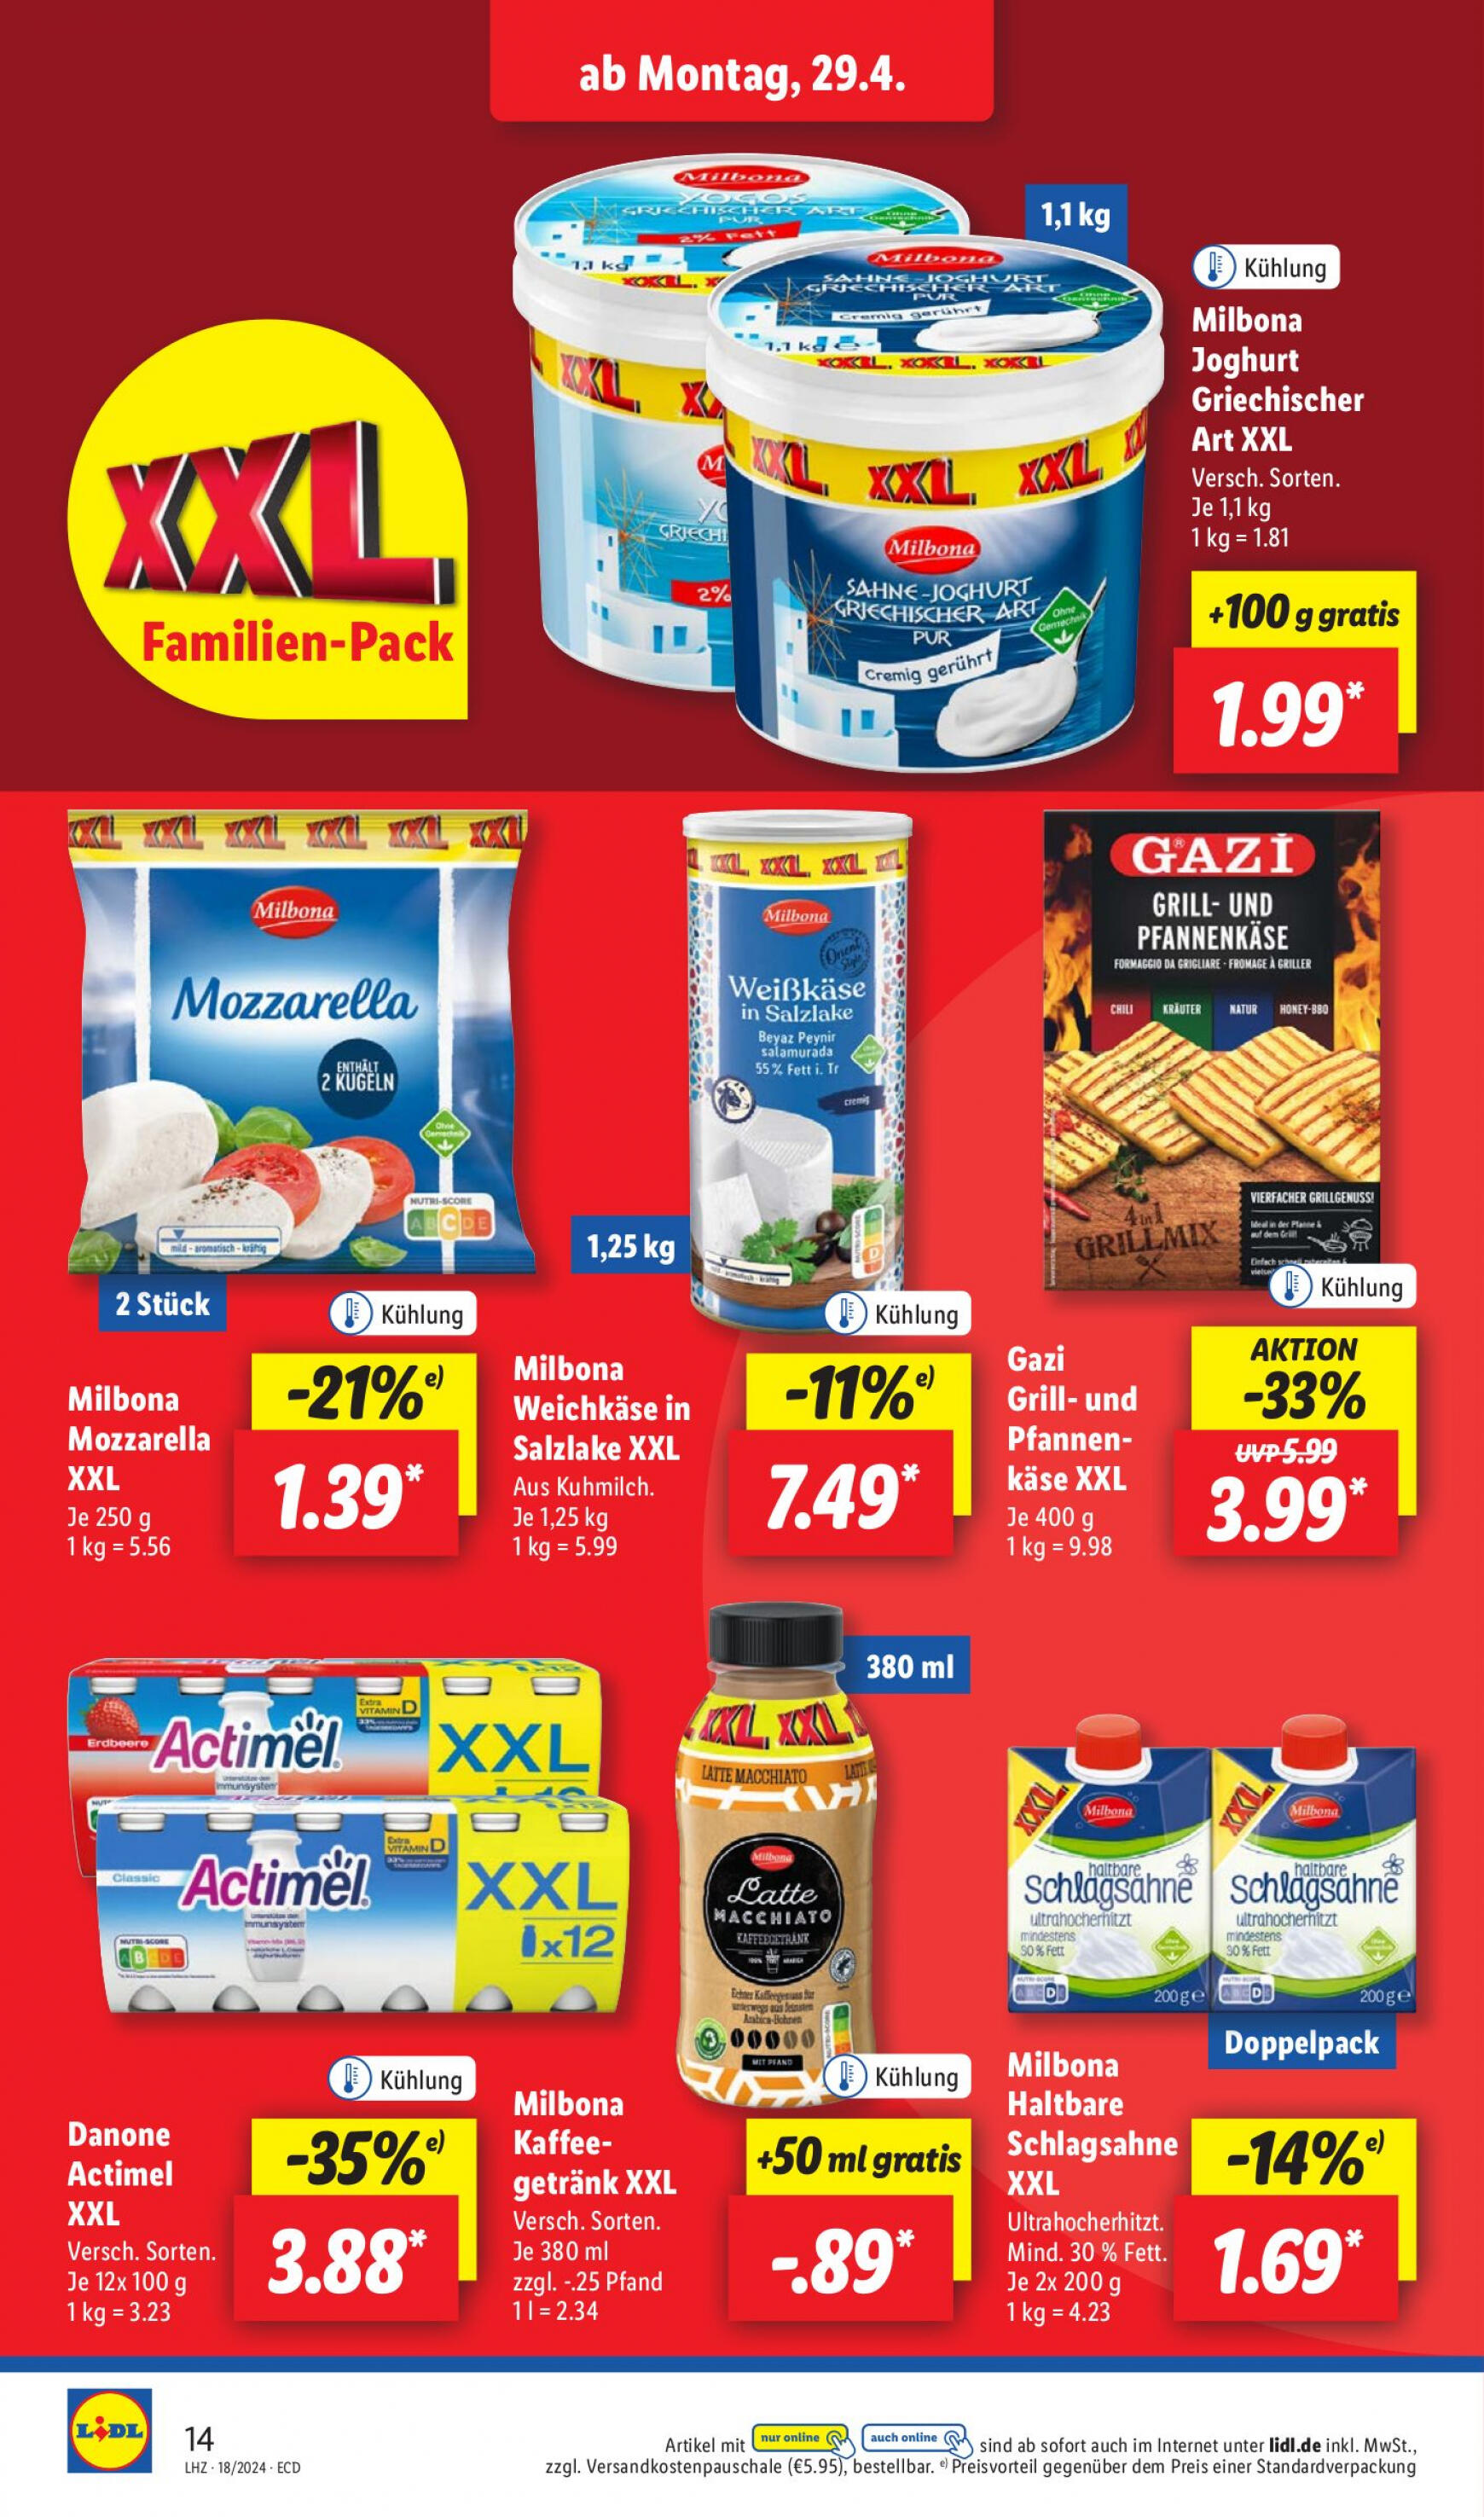 lidl - Flyer Lidl aktuell 29.04. - 04.05. - page: 18